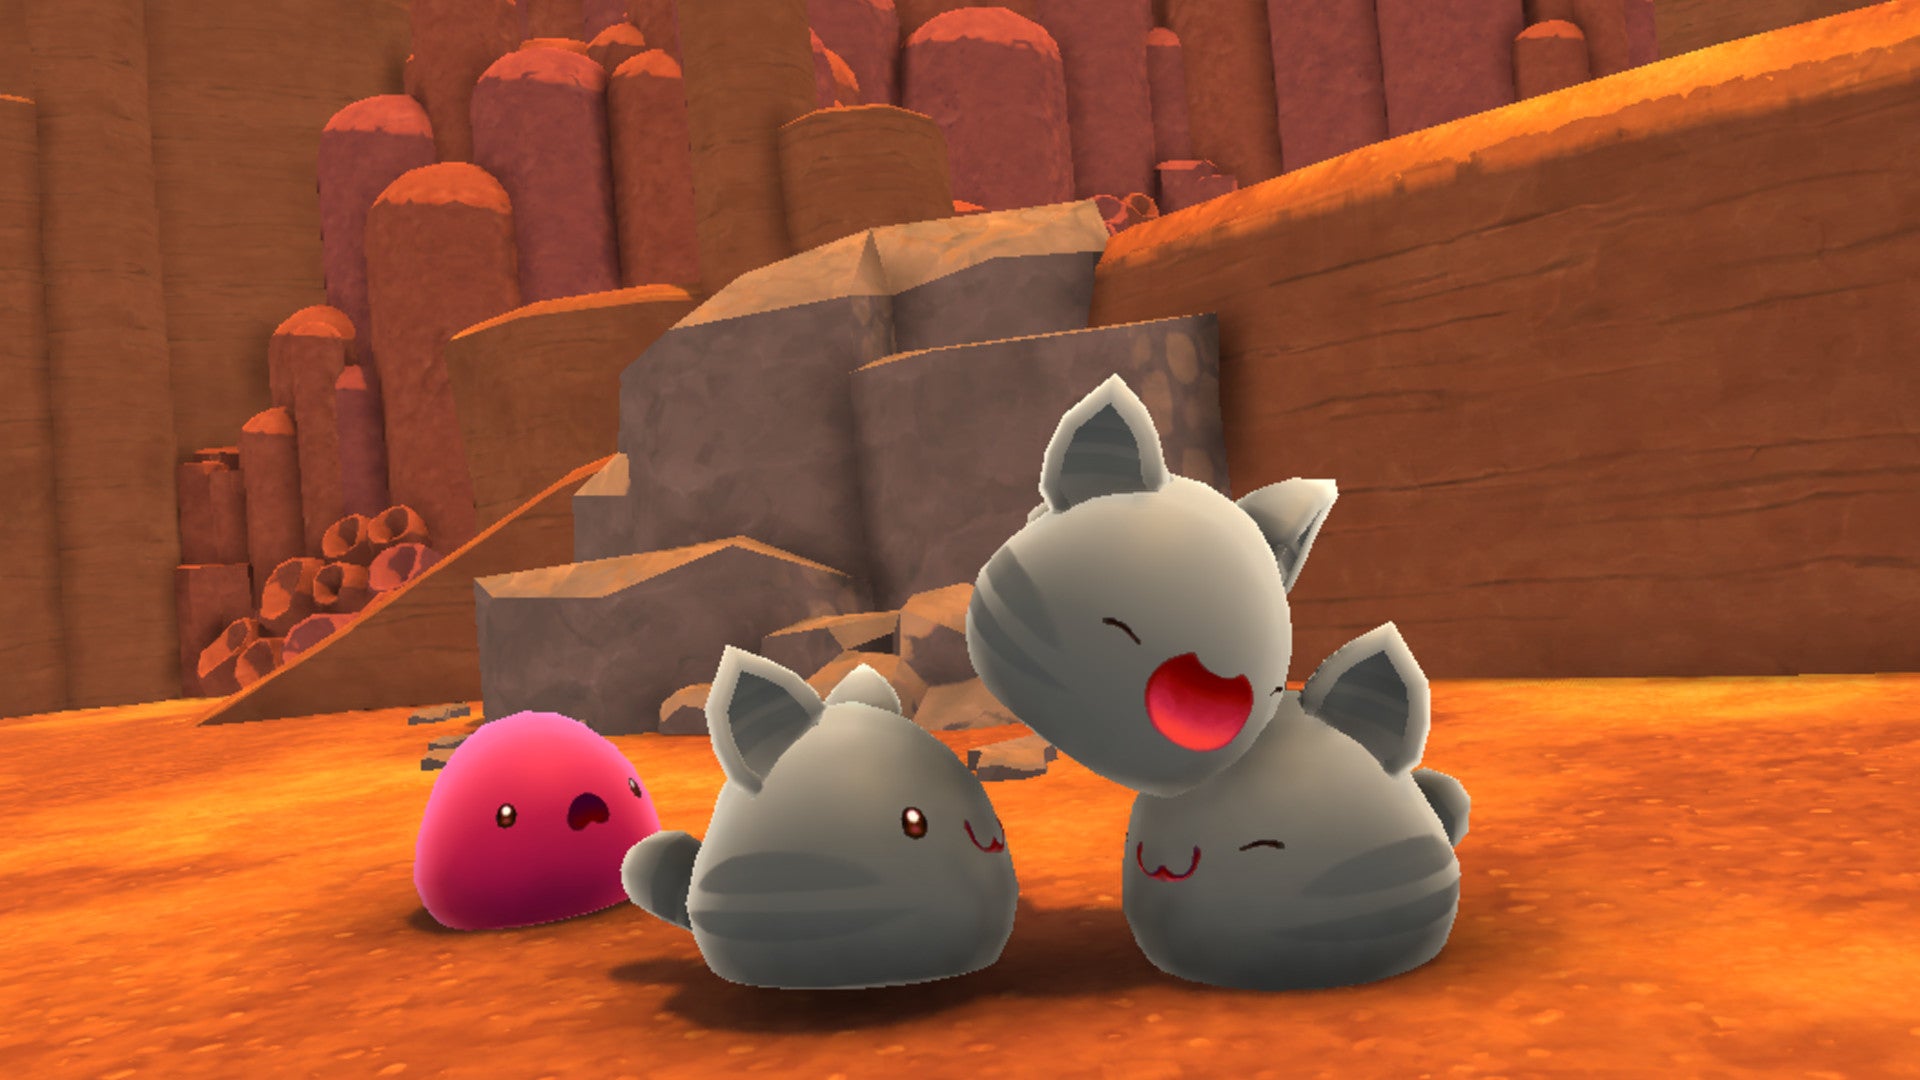 free download slime rancher 2 all slimes